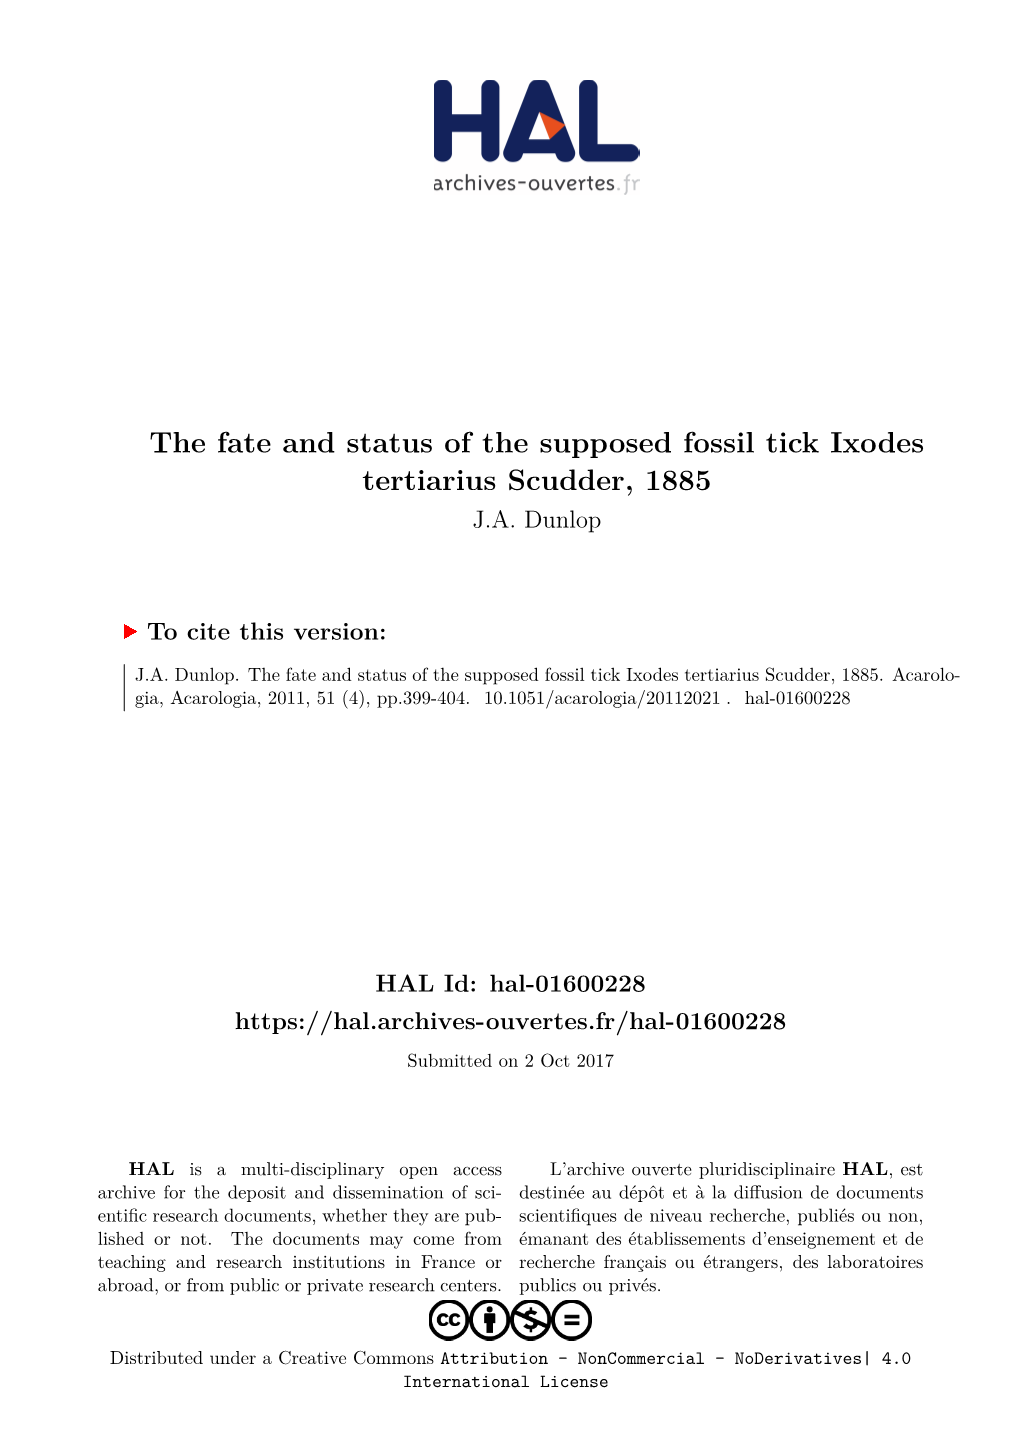 The Fate and Status of the Supposed Fossil Tick Ixodes Tertiarius Scudder, 1885 J.A